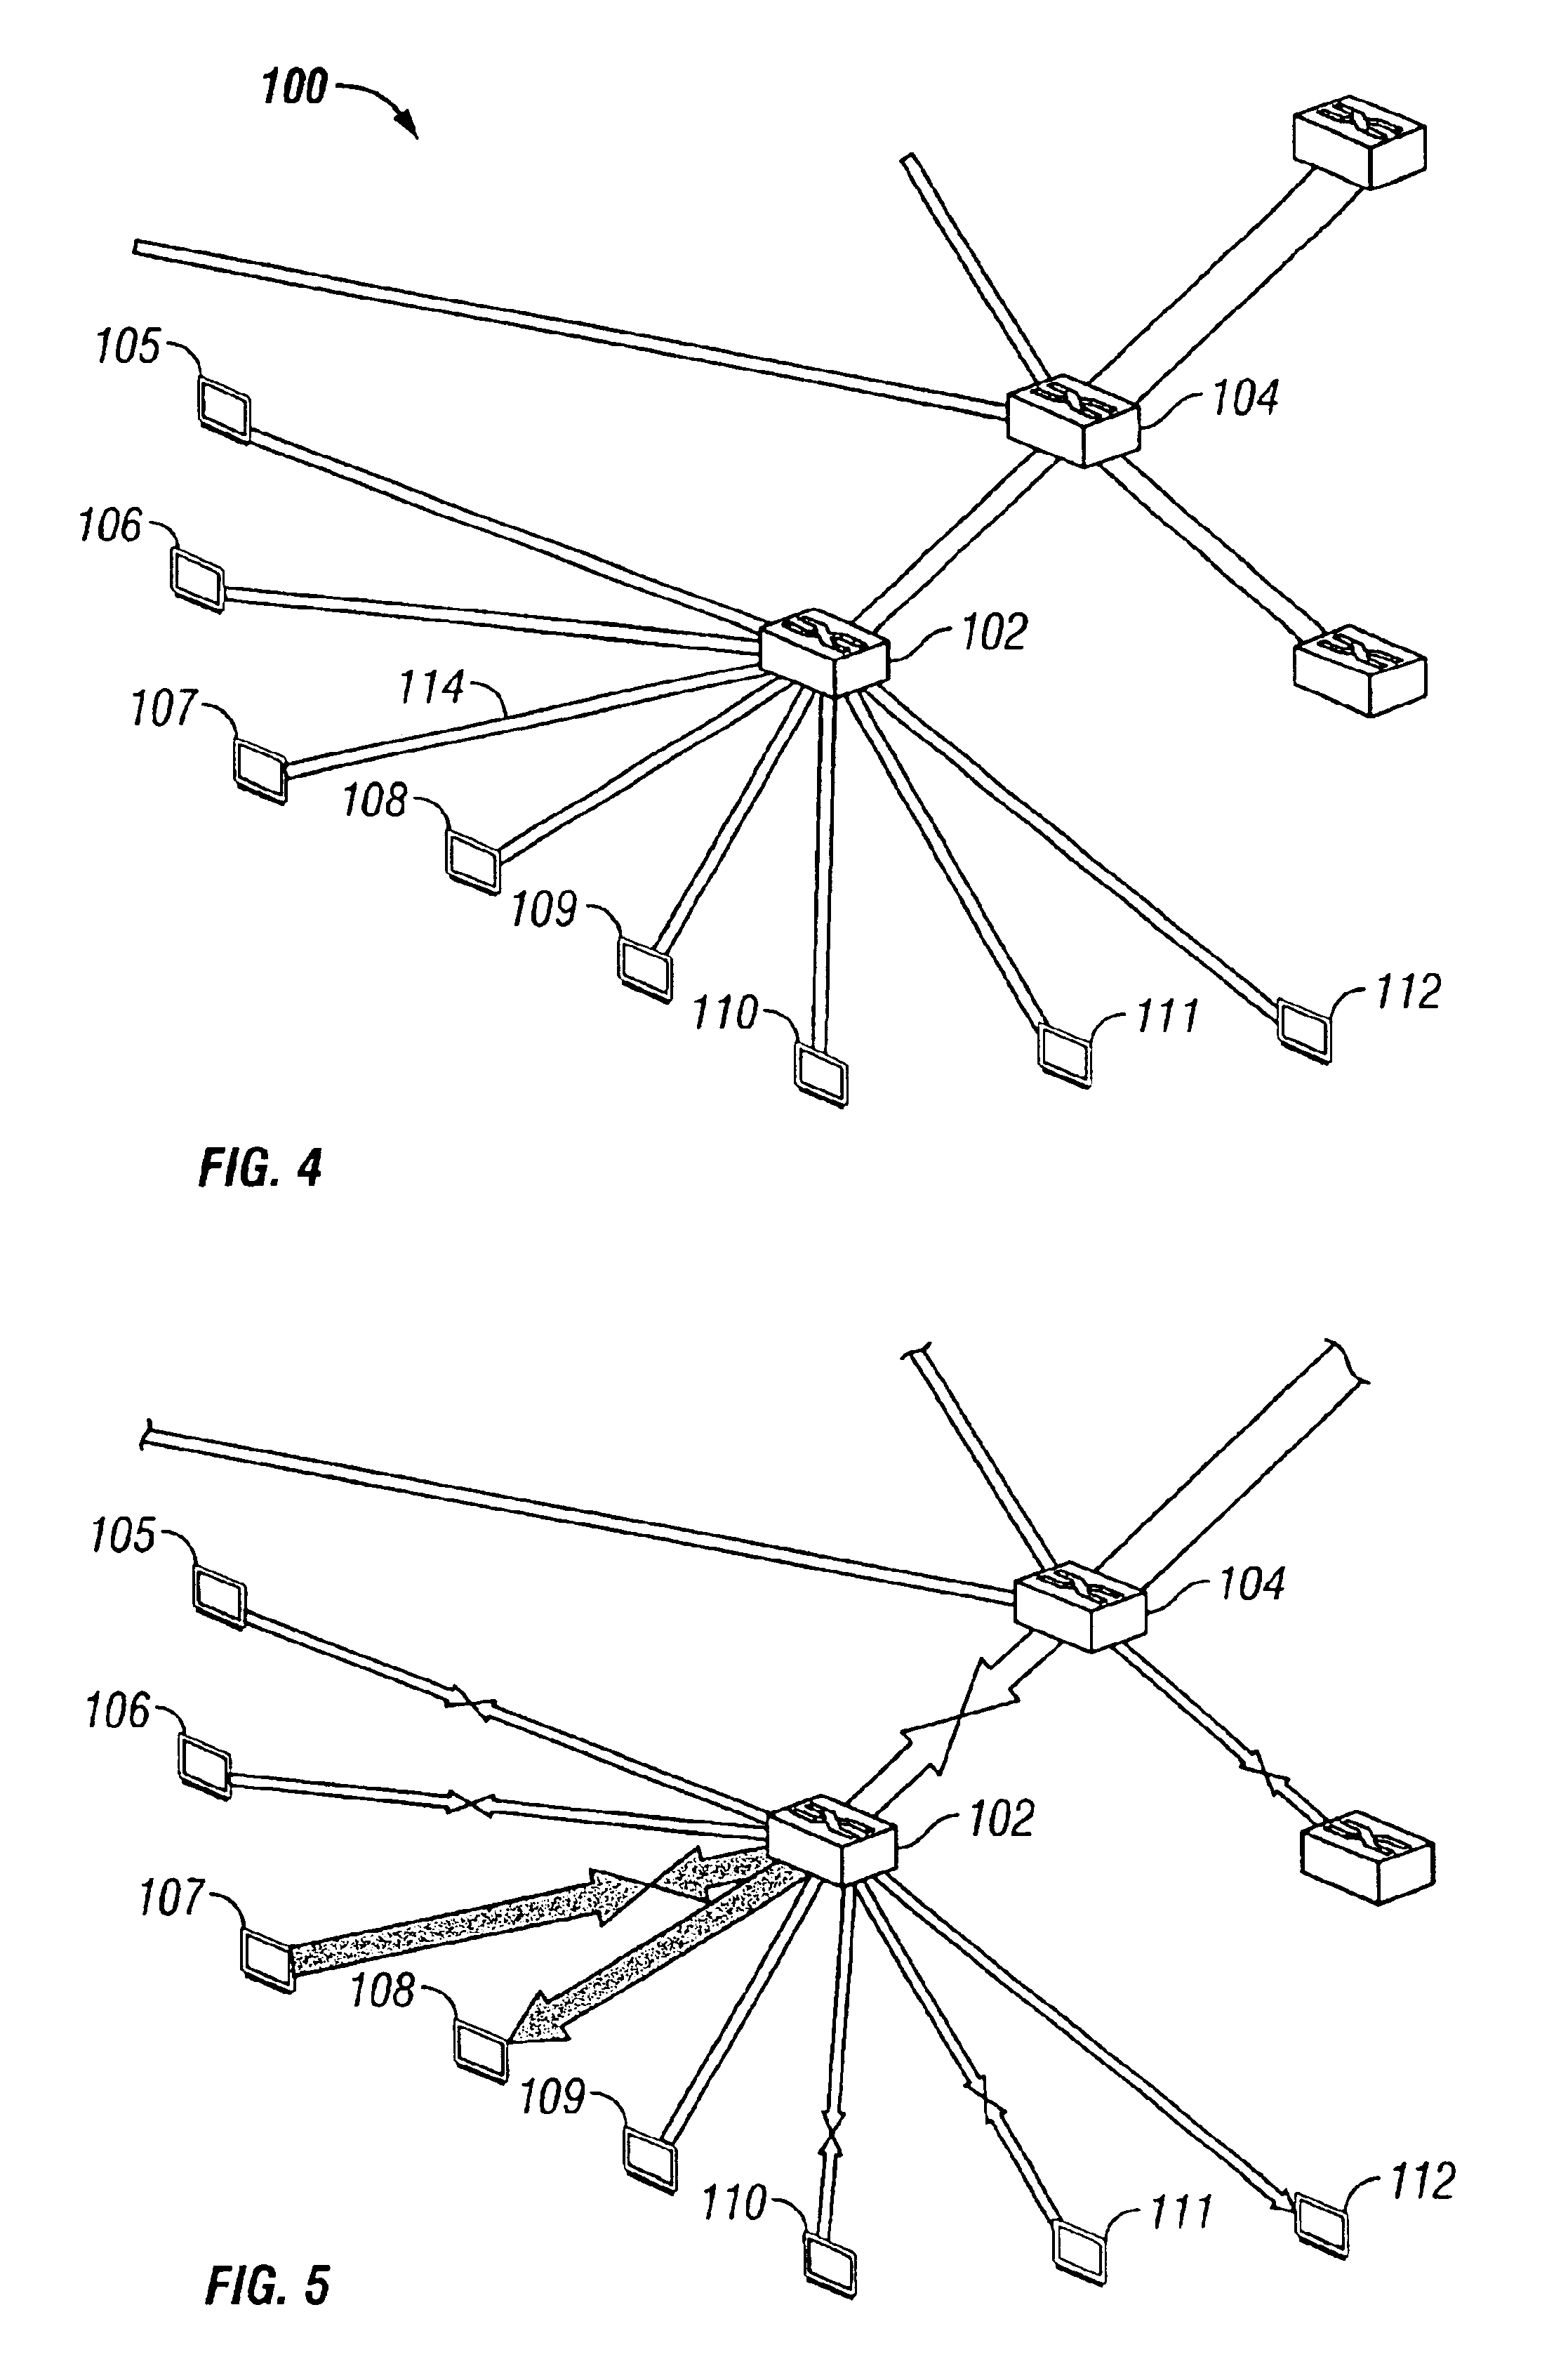 Performance and flow analysis method for communication networks